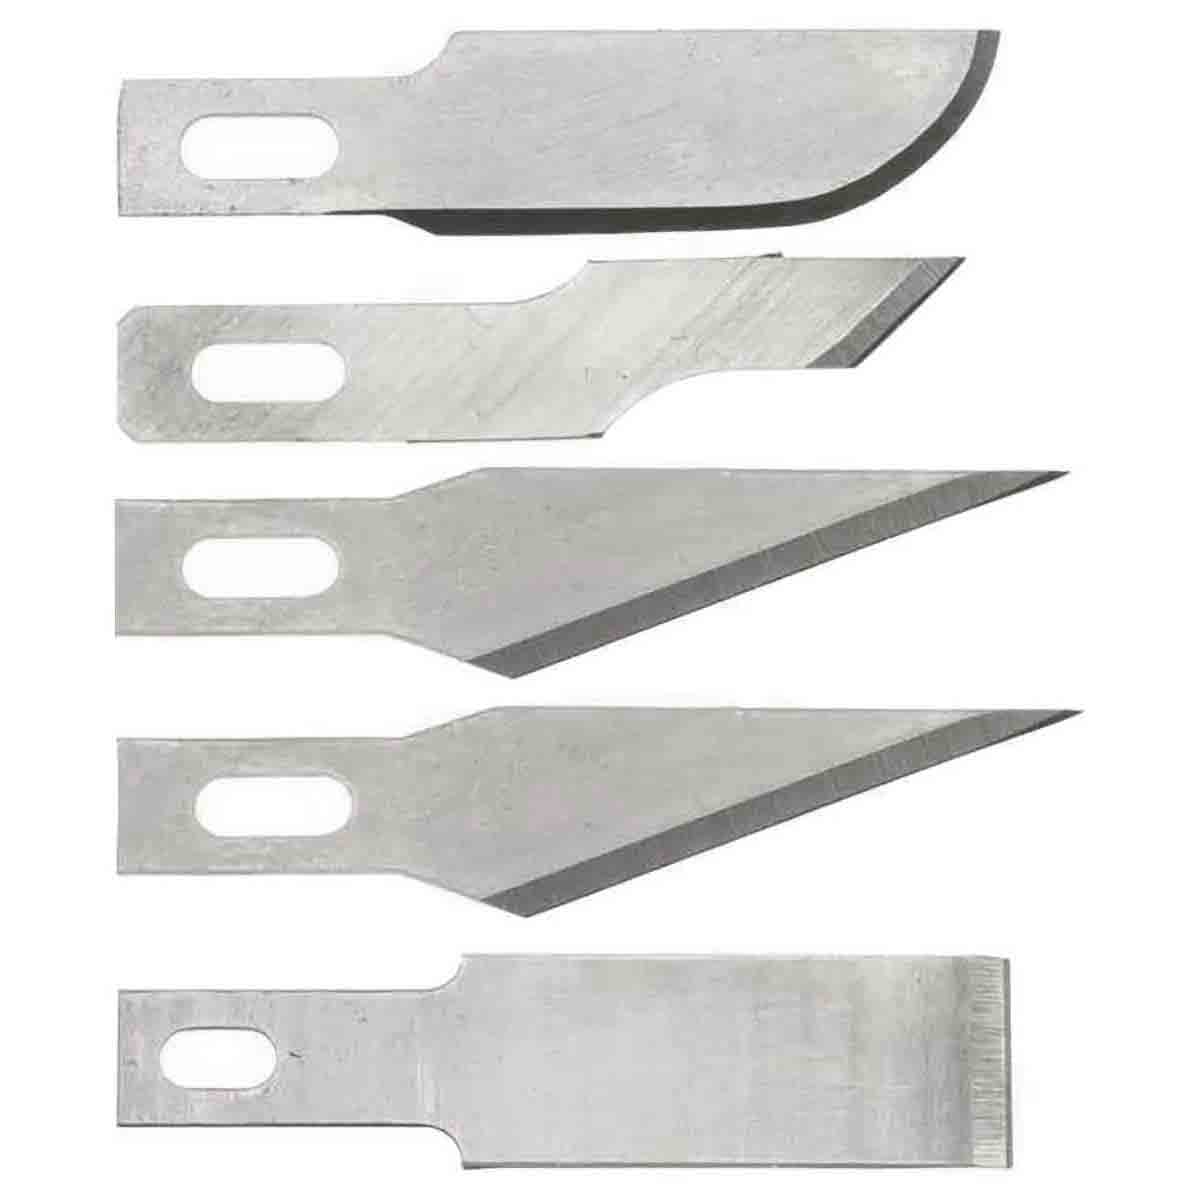 Excel Blades - How to replace our #11 blade on our K1 knife by